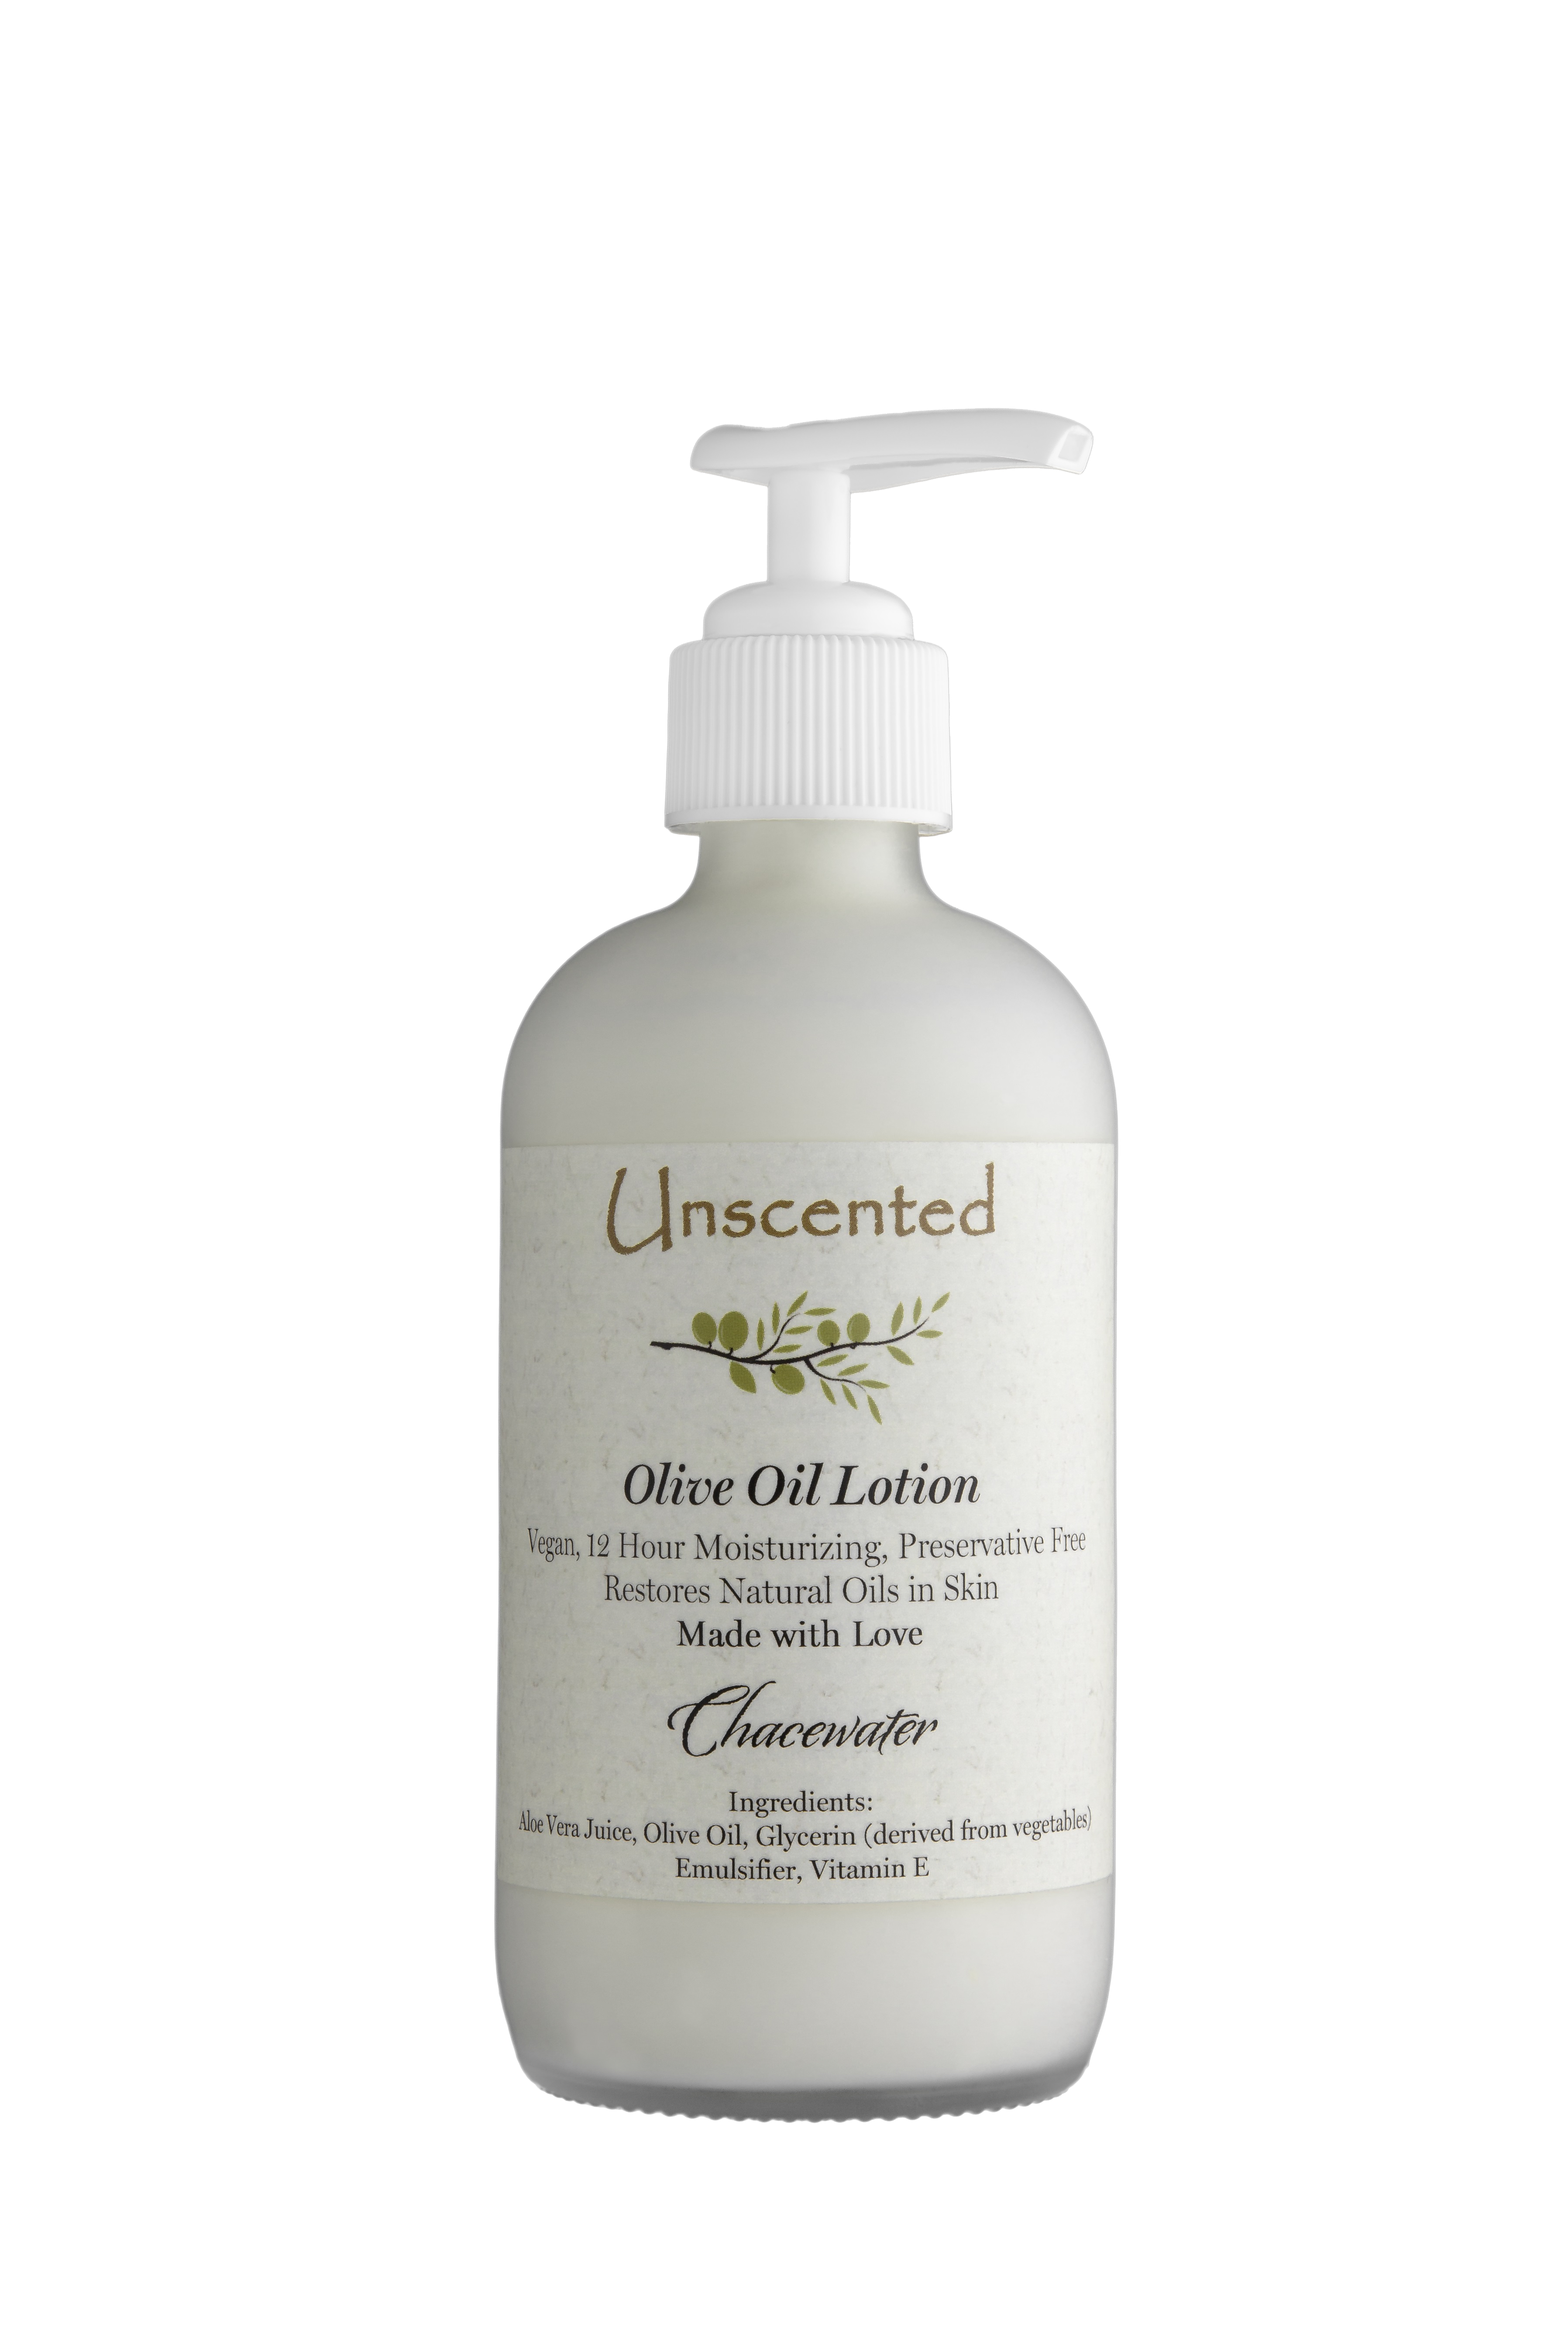 Product Image for Unscented Olive Oil Lotion